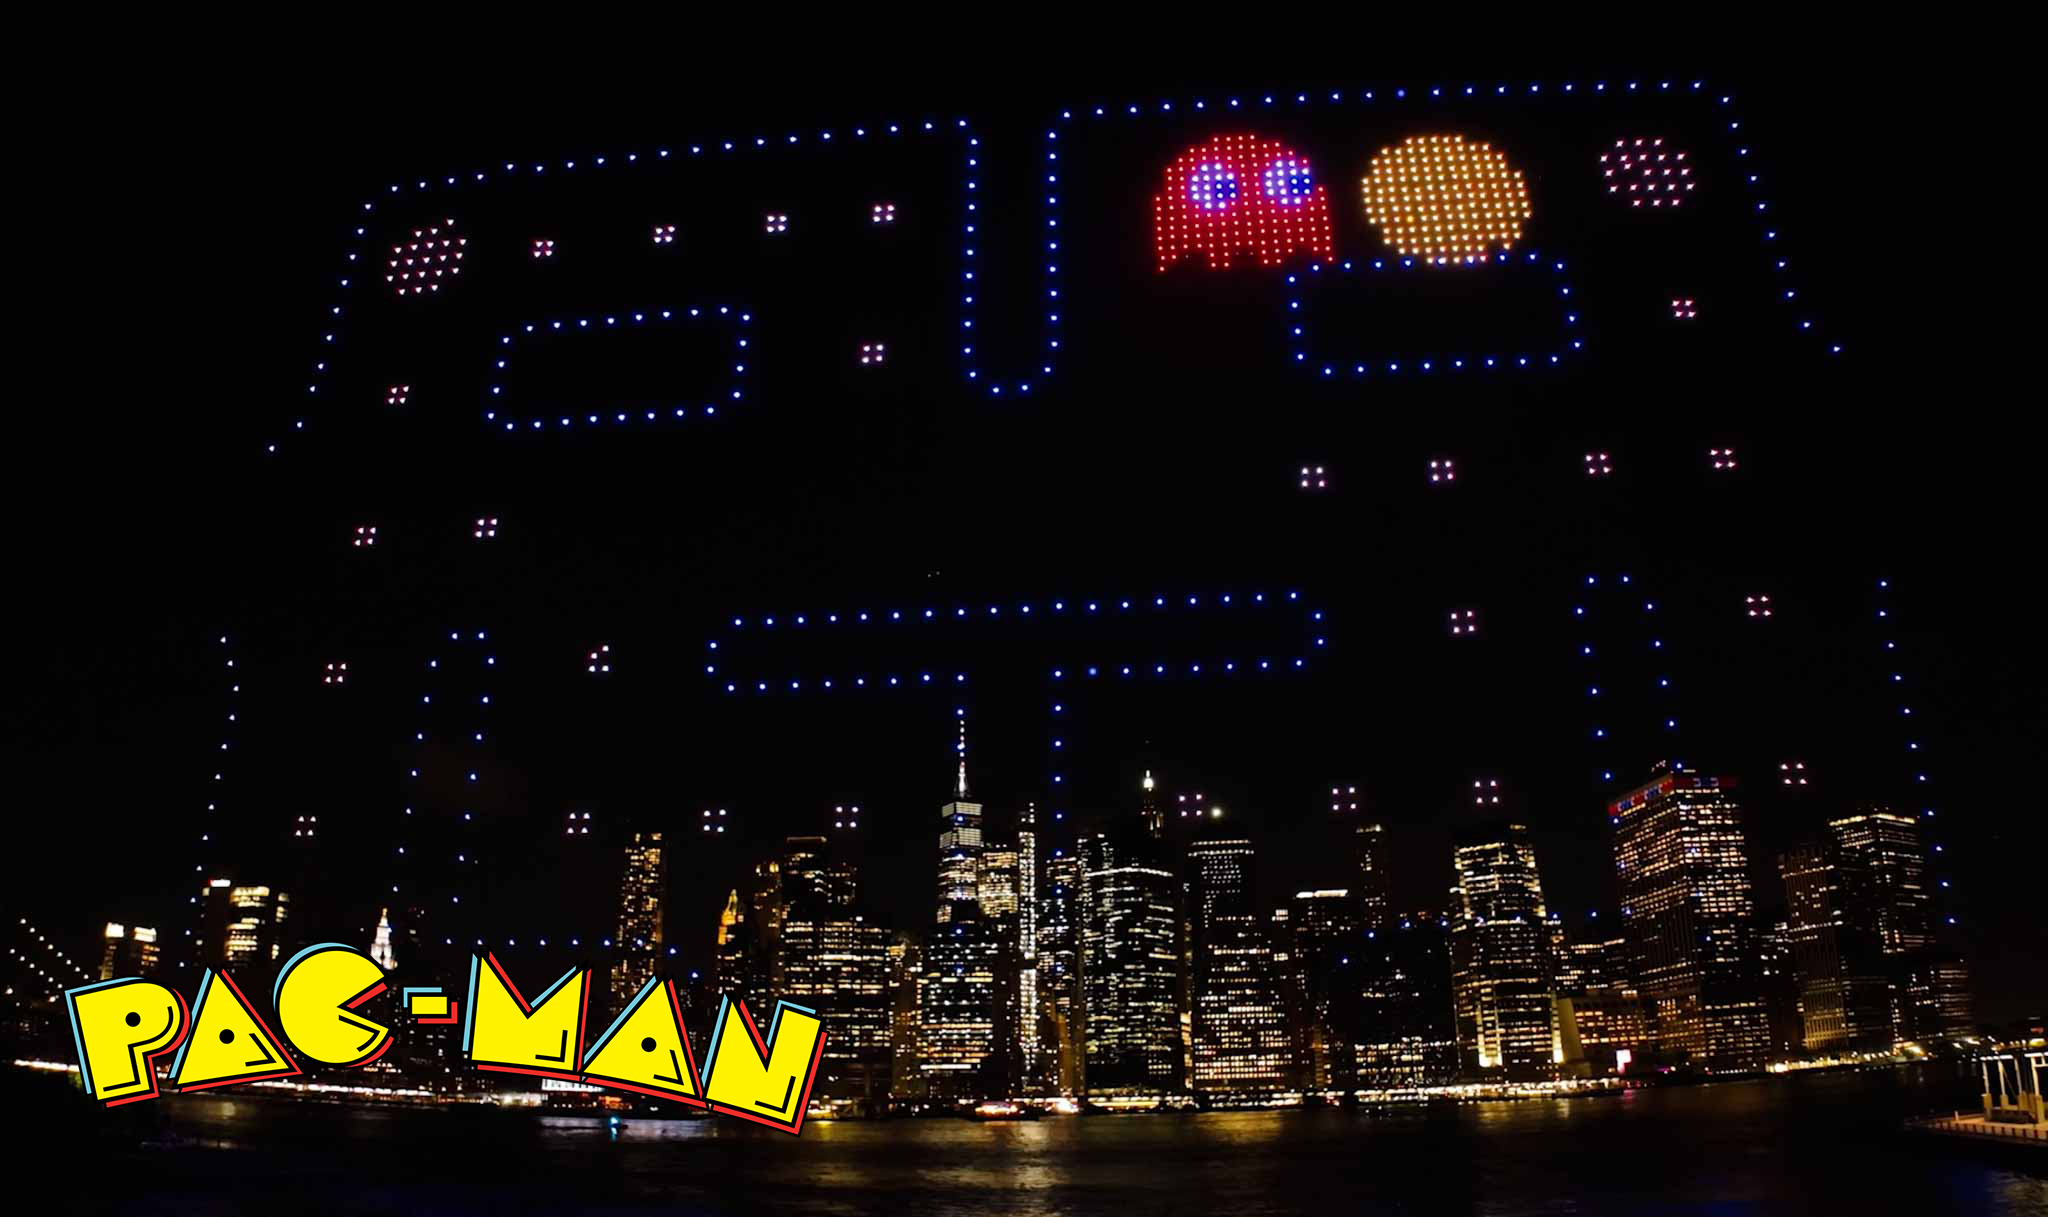 A giant PAC-MAN gameboard in a drone light show over NYC